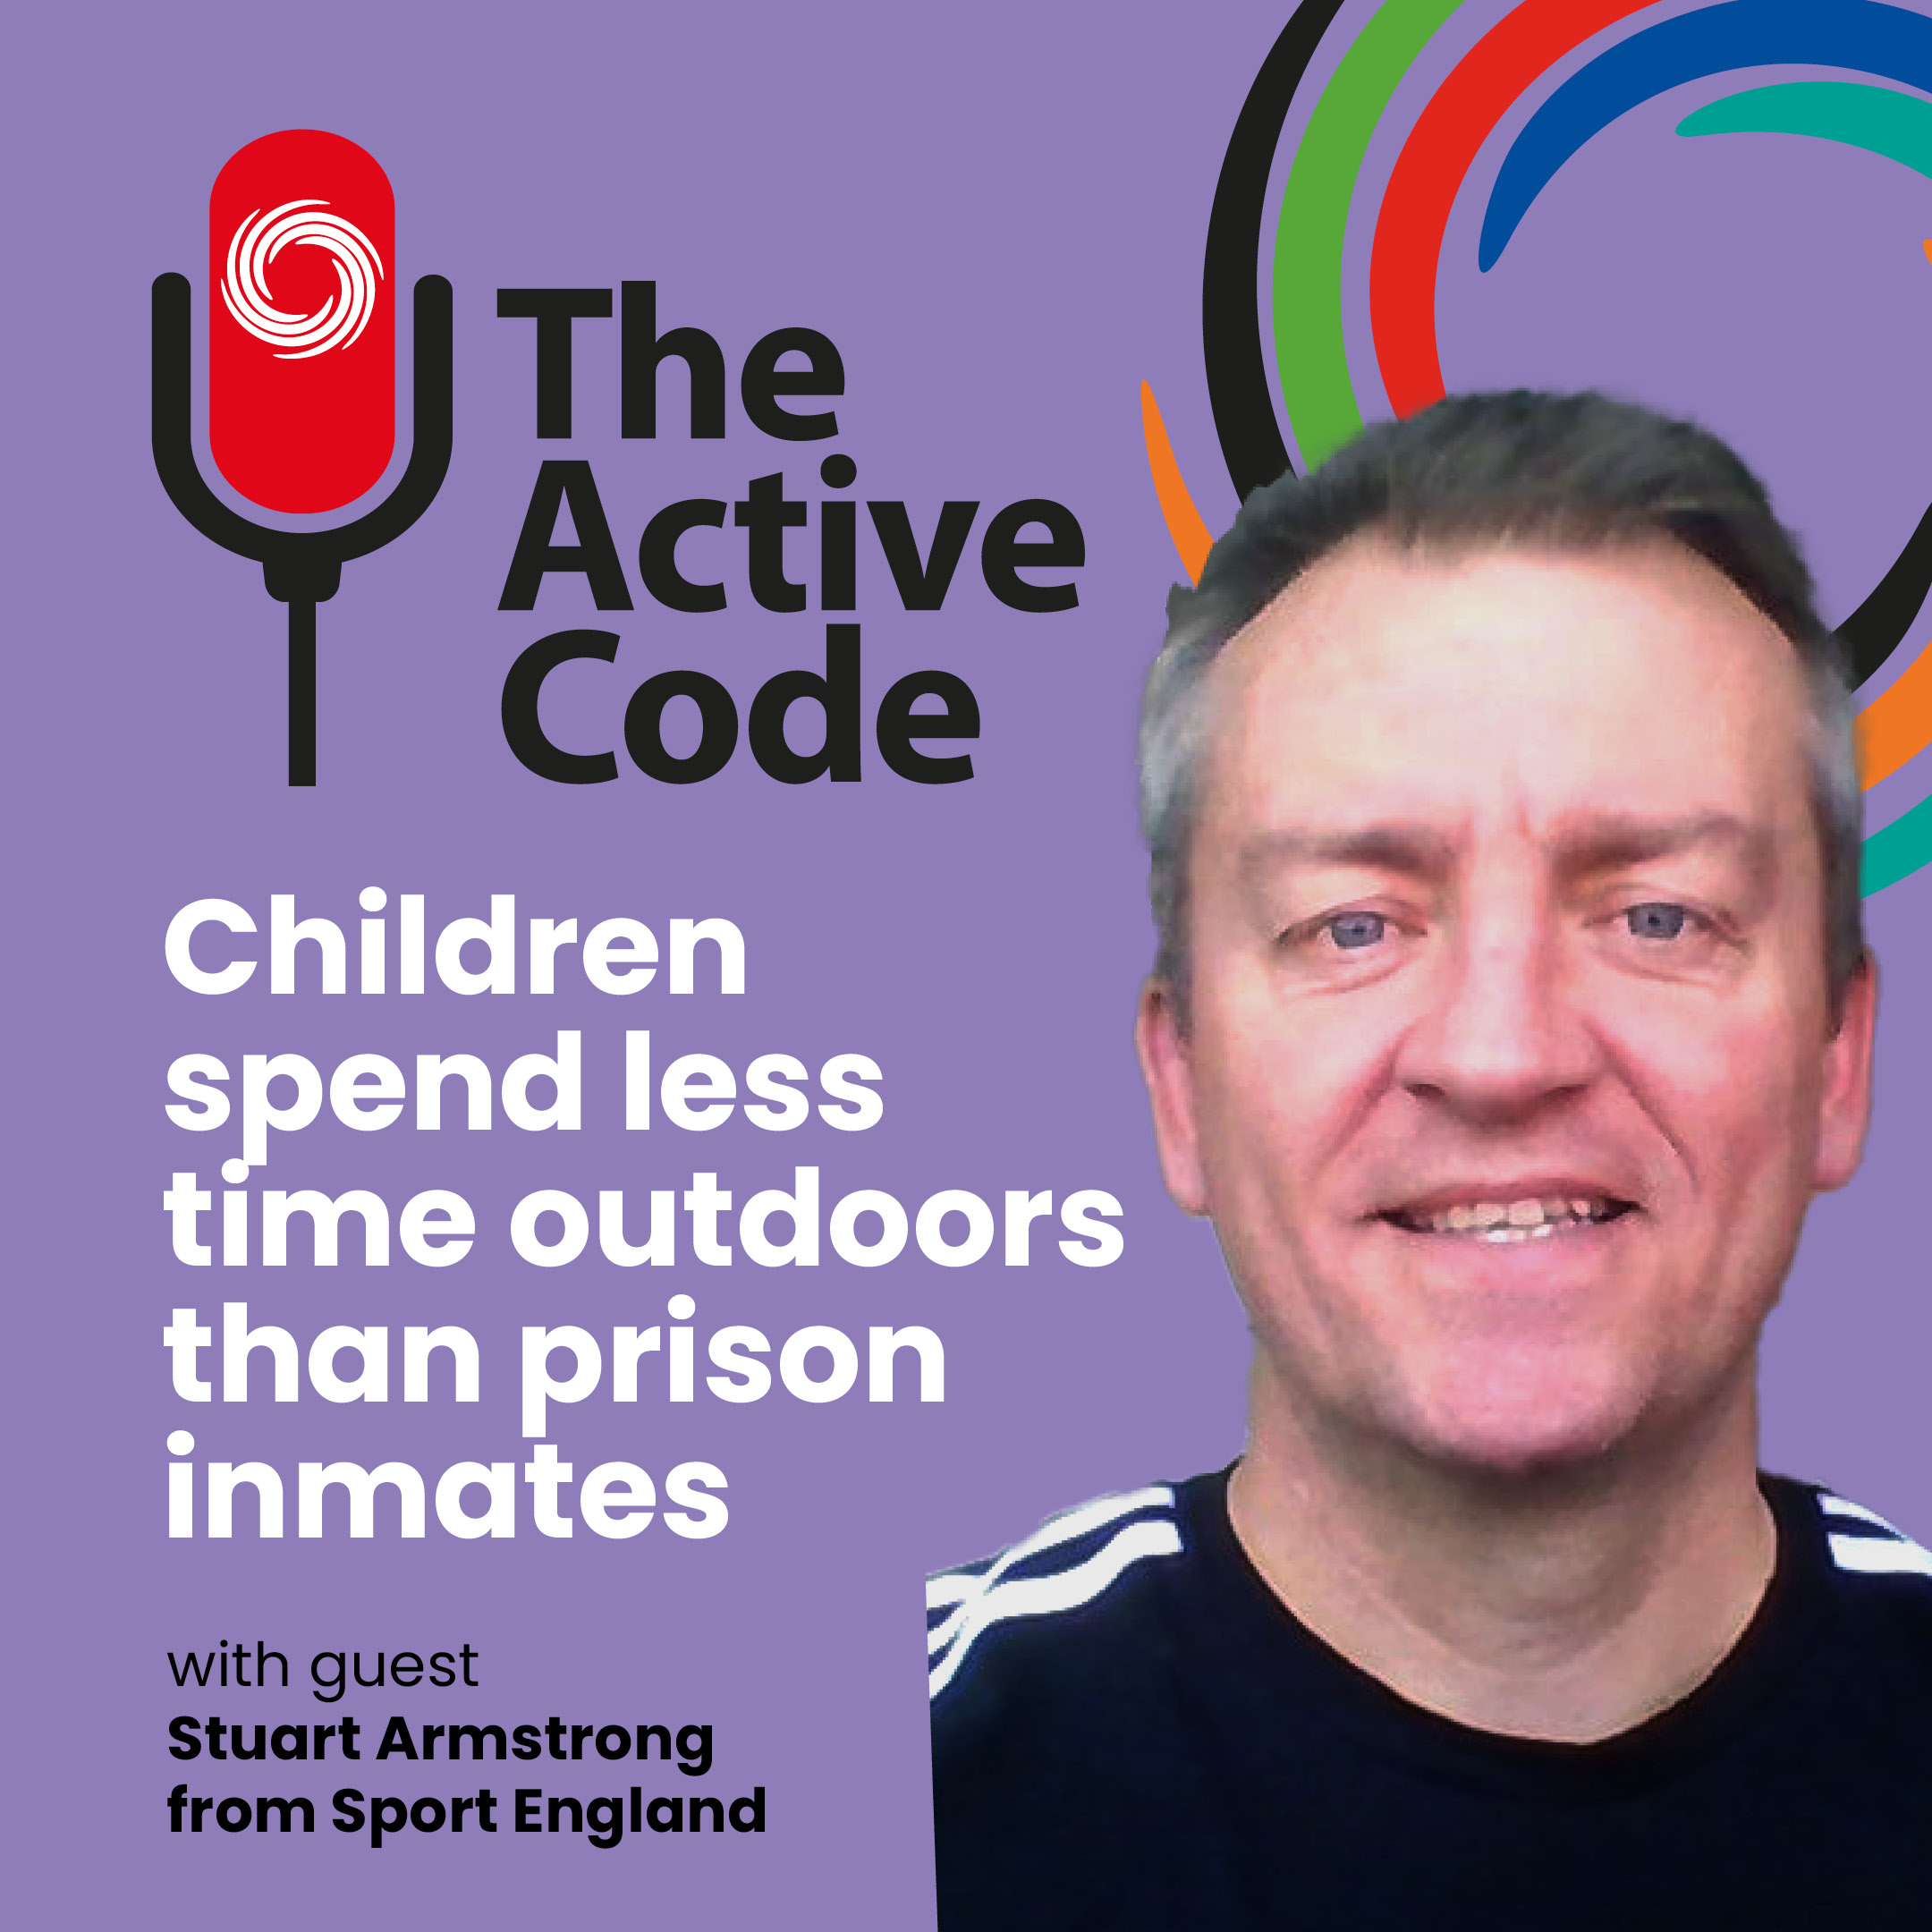 The Active Code – Children spend less time outdoors than prison inmates